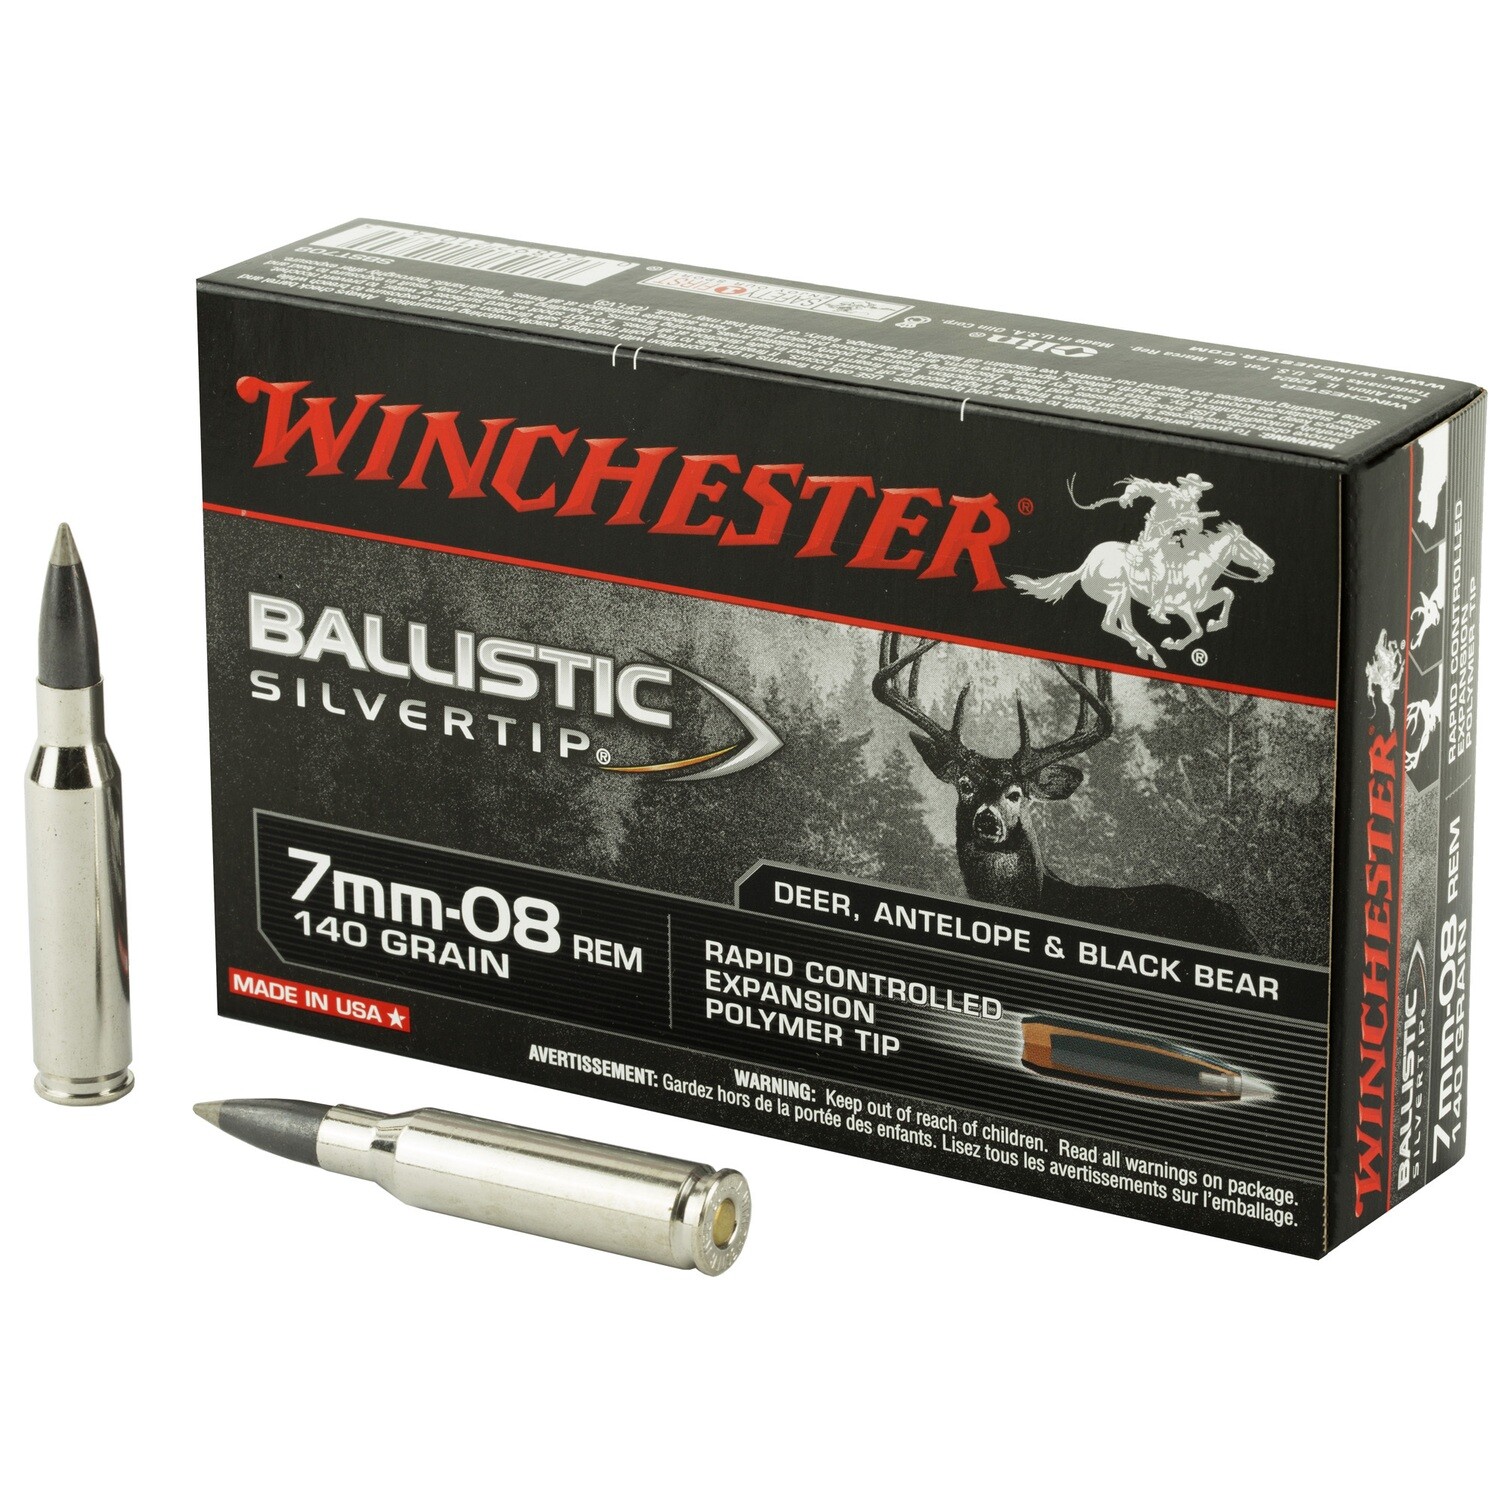 makes Ballistic Silvertip the choice for those who appreciate the legendary...